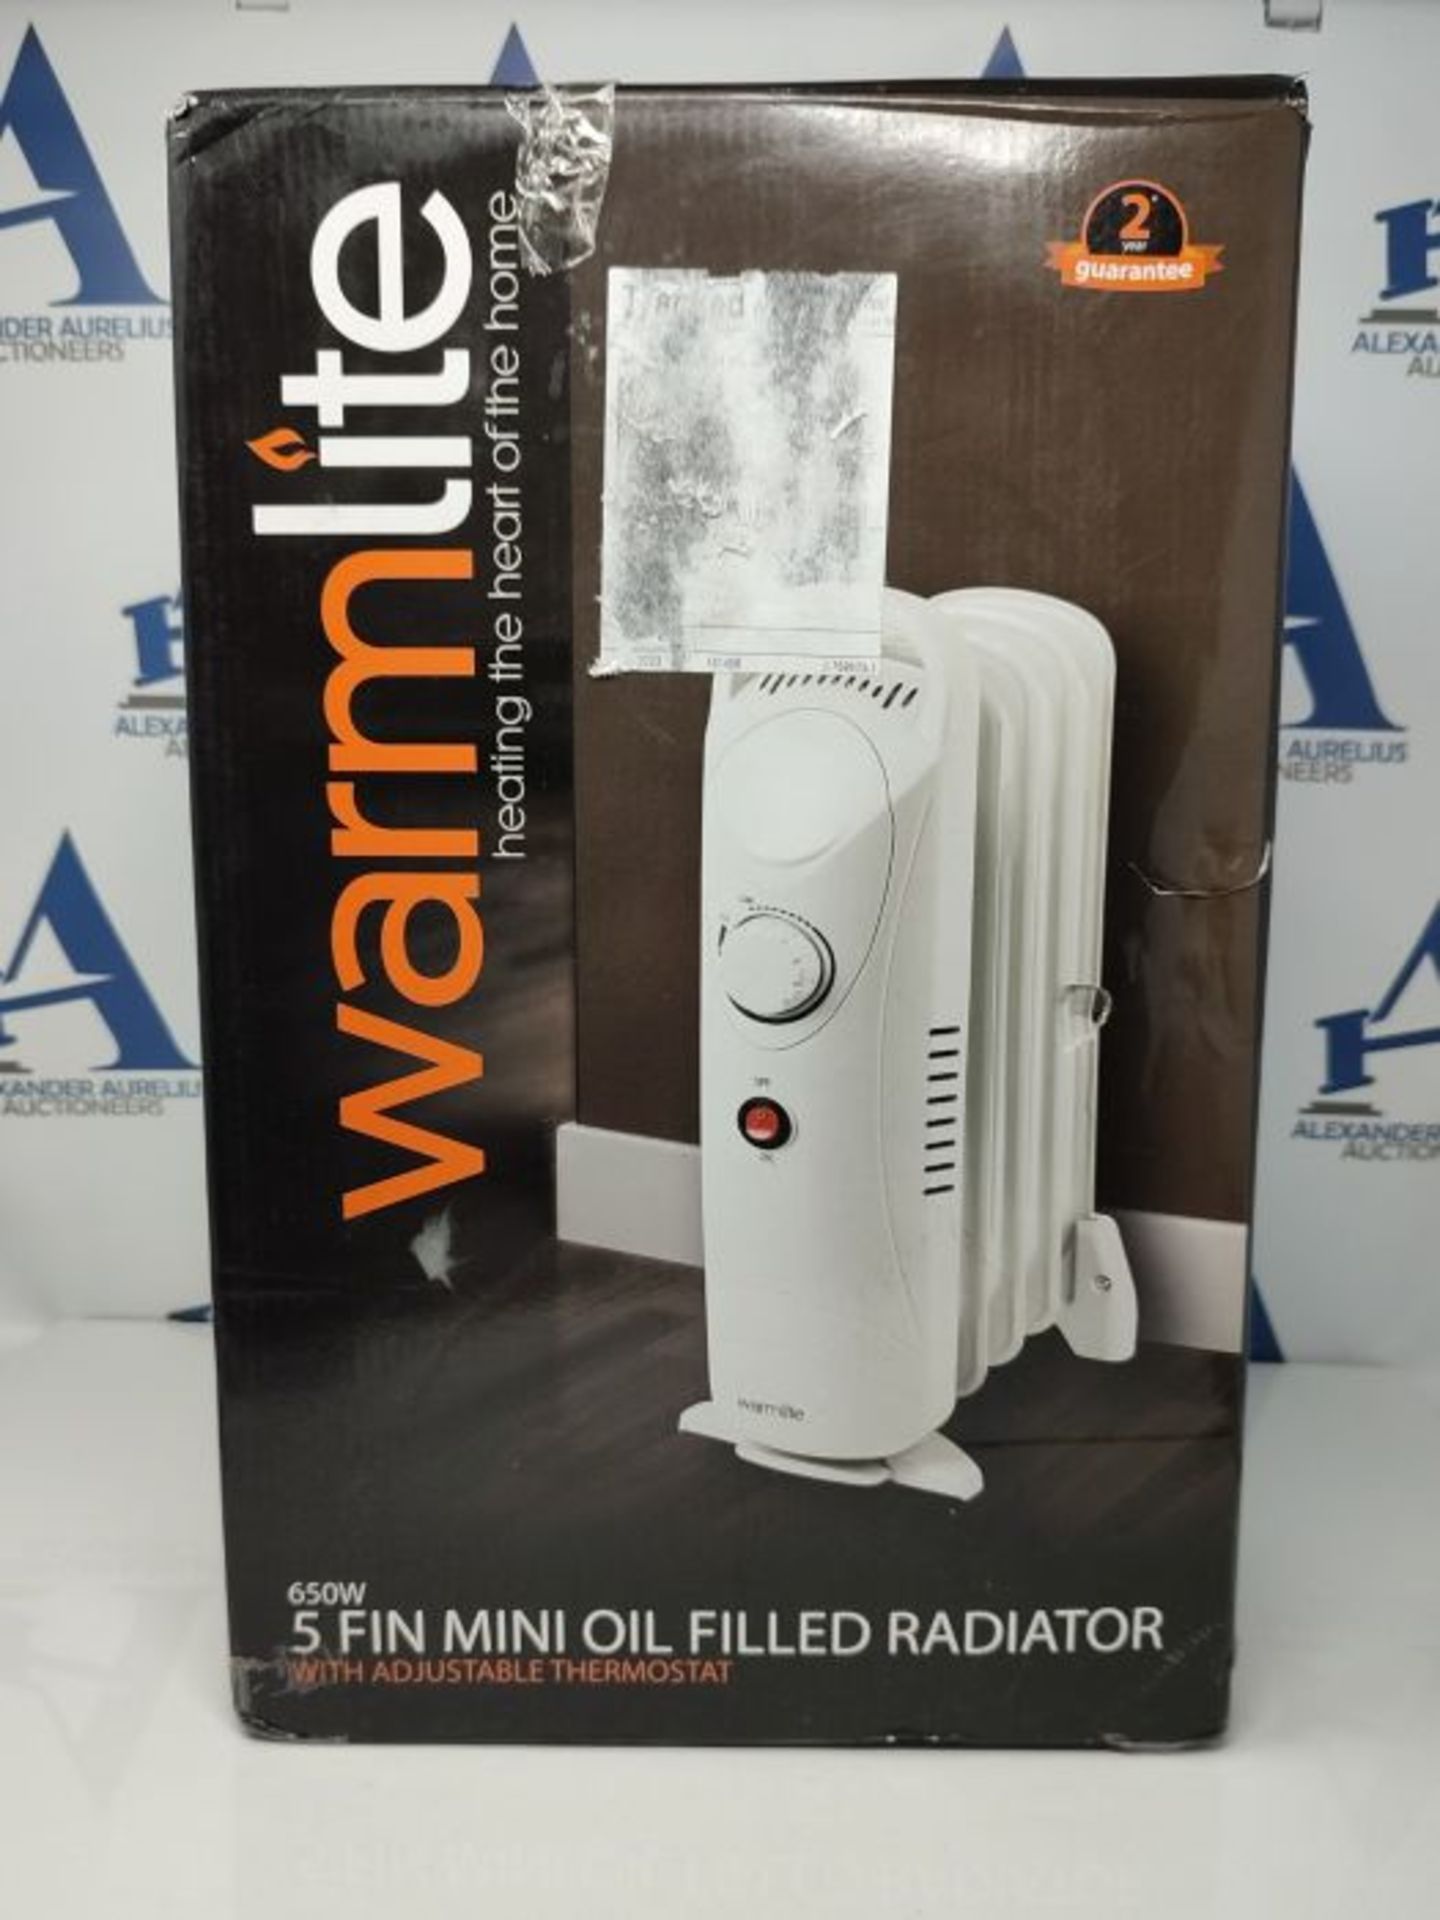 Warmlite WL43002YW 650W 5 Fin Oil Filled Radiator with Adjustable Thermostat and Overh - Image 2 of 3